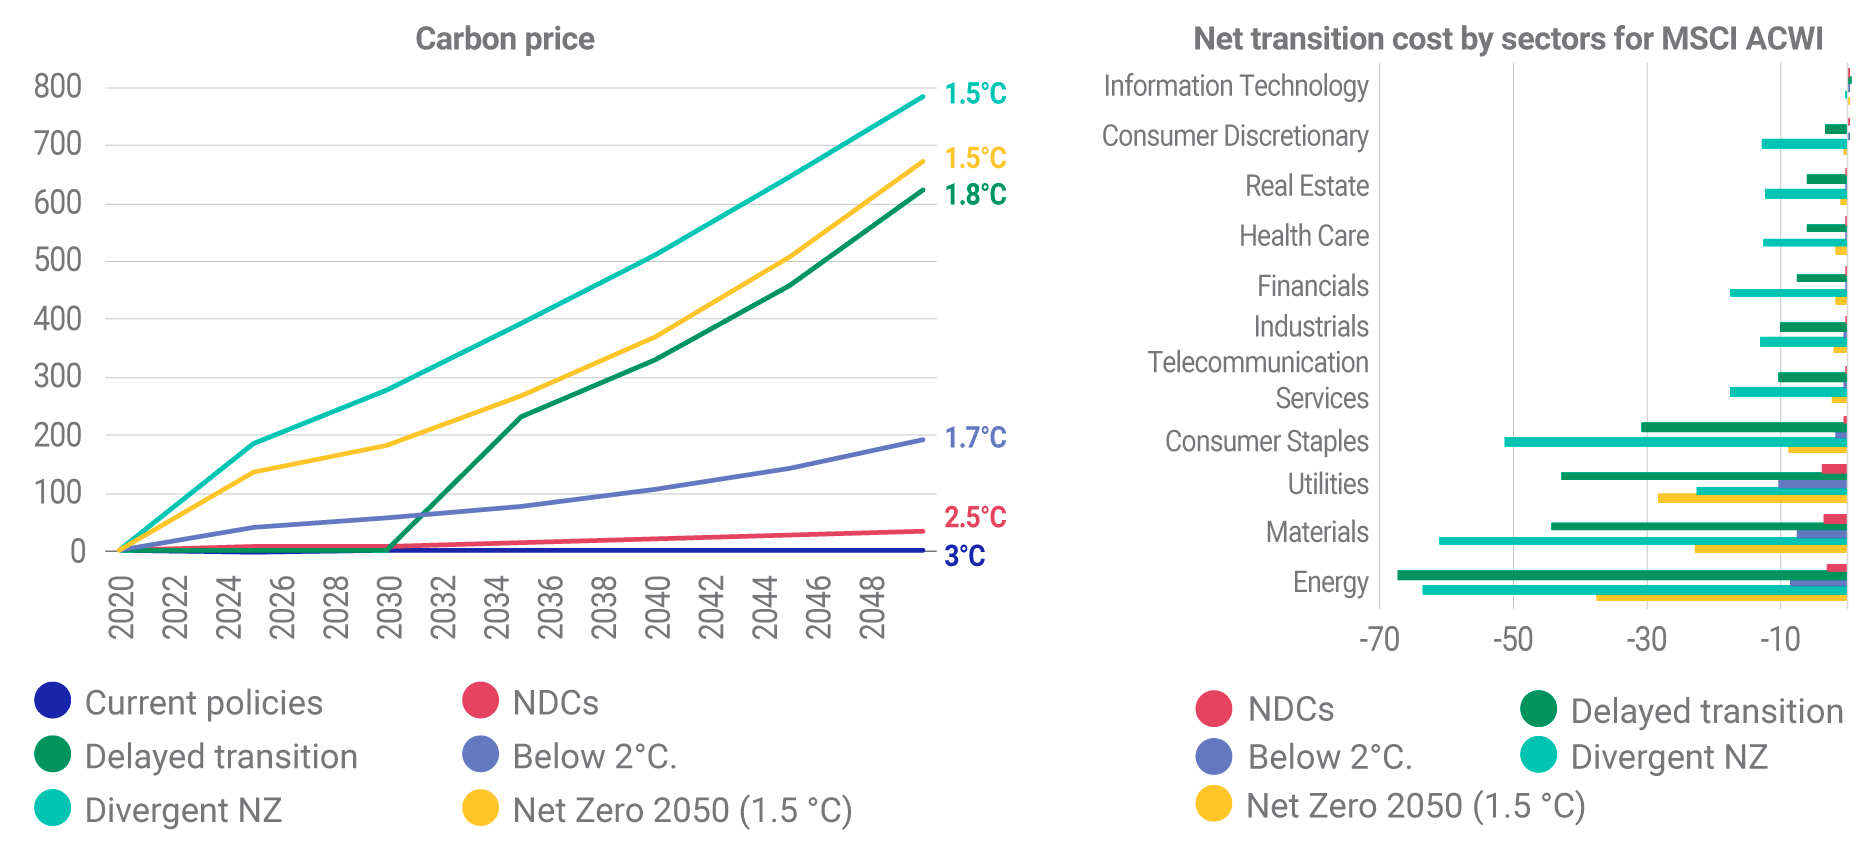 The graphic on the left depicts the projected trajectory of carbon prices under various scenarios, while chart on the right details the net transition costs for MSCI ACWI Index sectors.